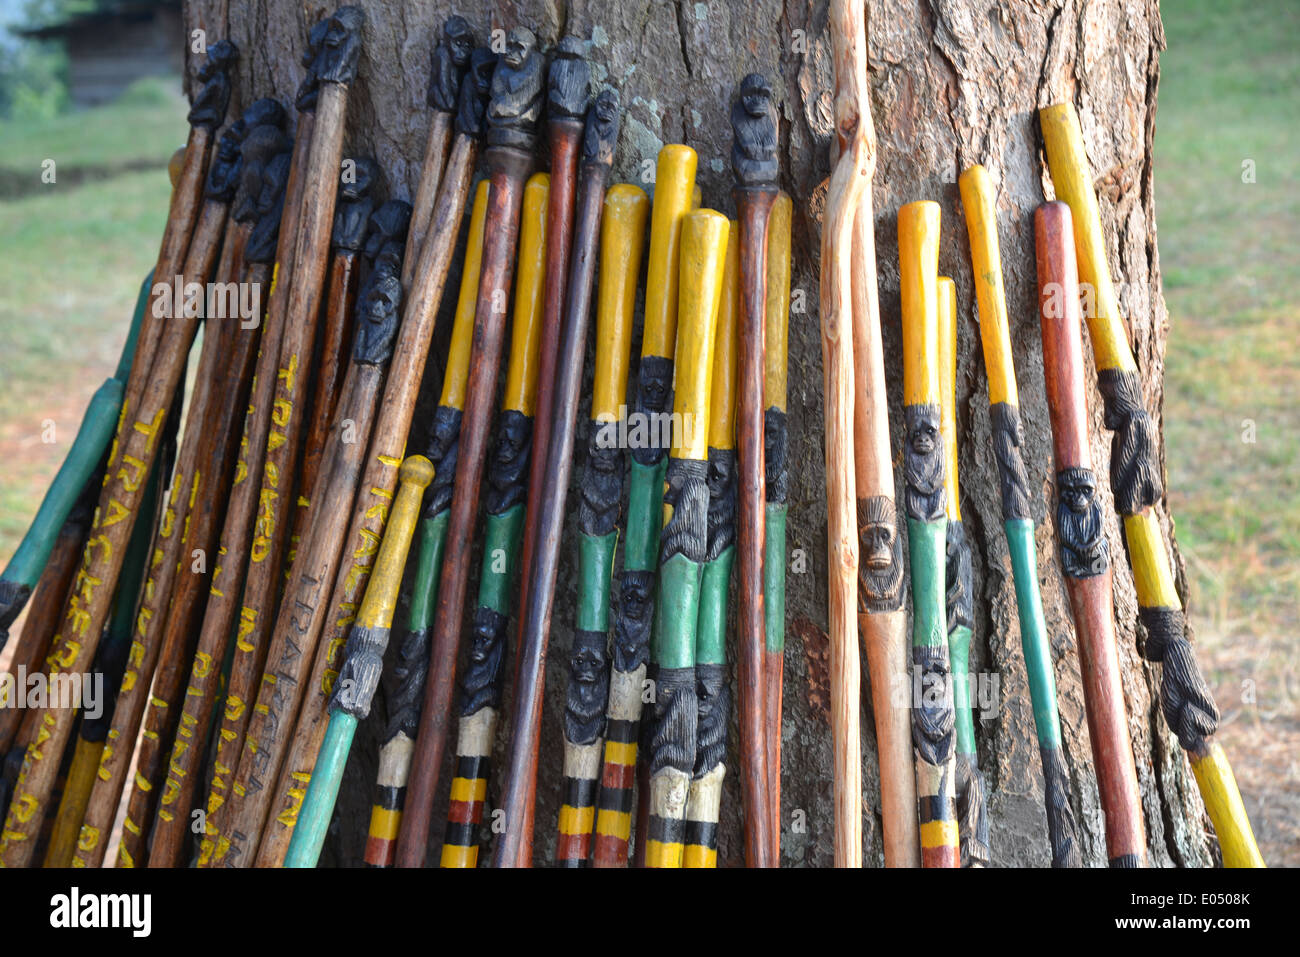 a collection of walking sticks used during trekking to find gorilla's in bwindi national park, Uganda Stock Photo